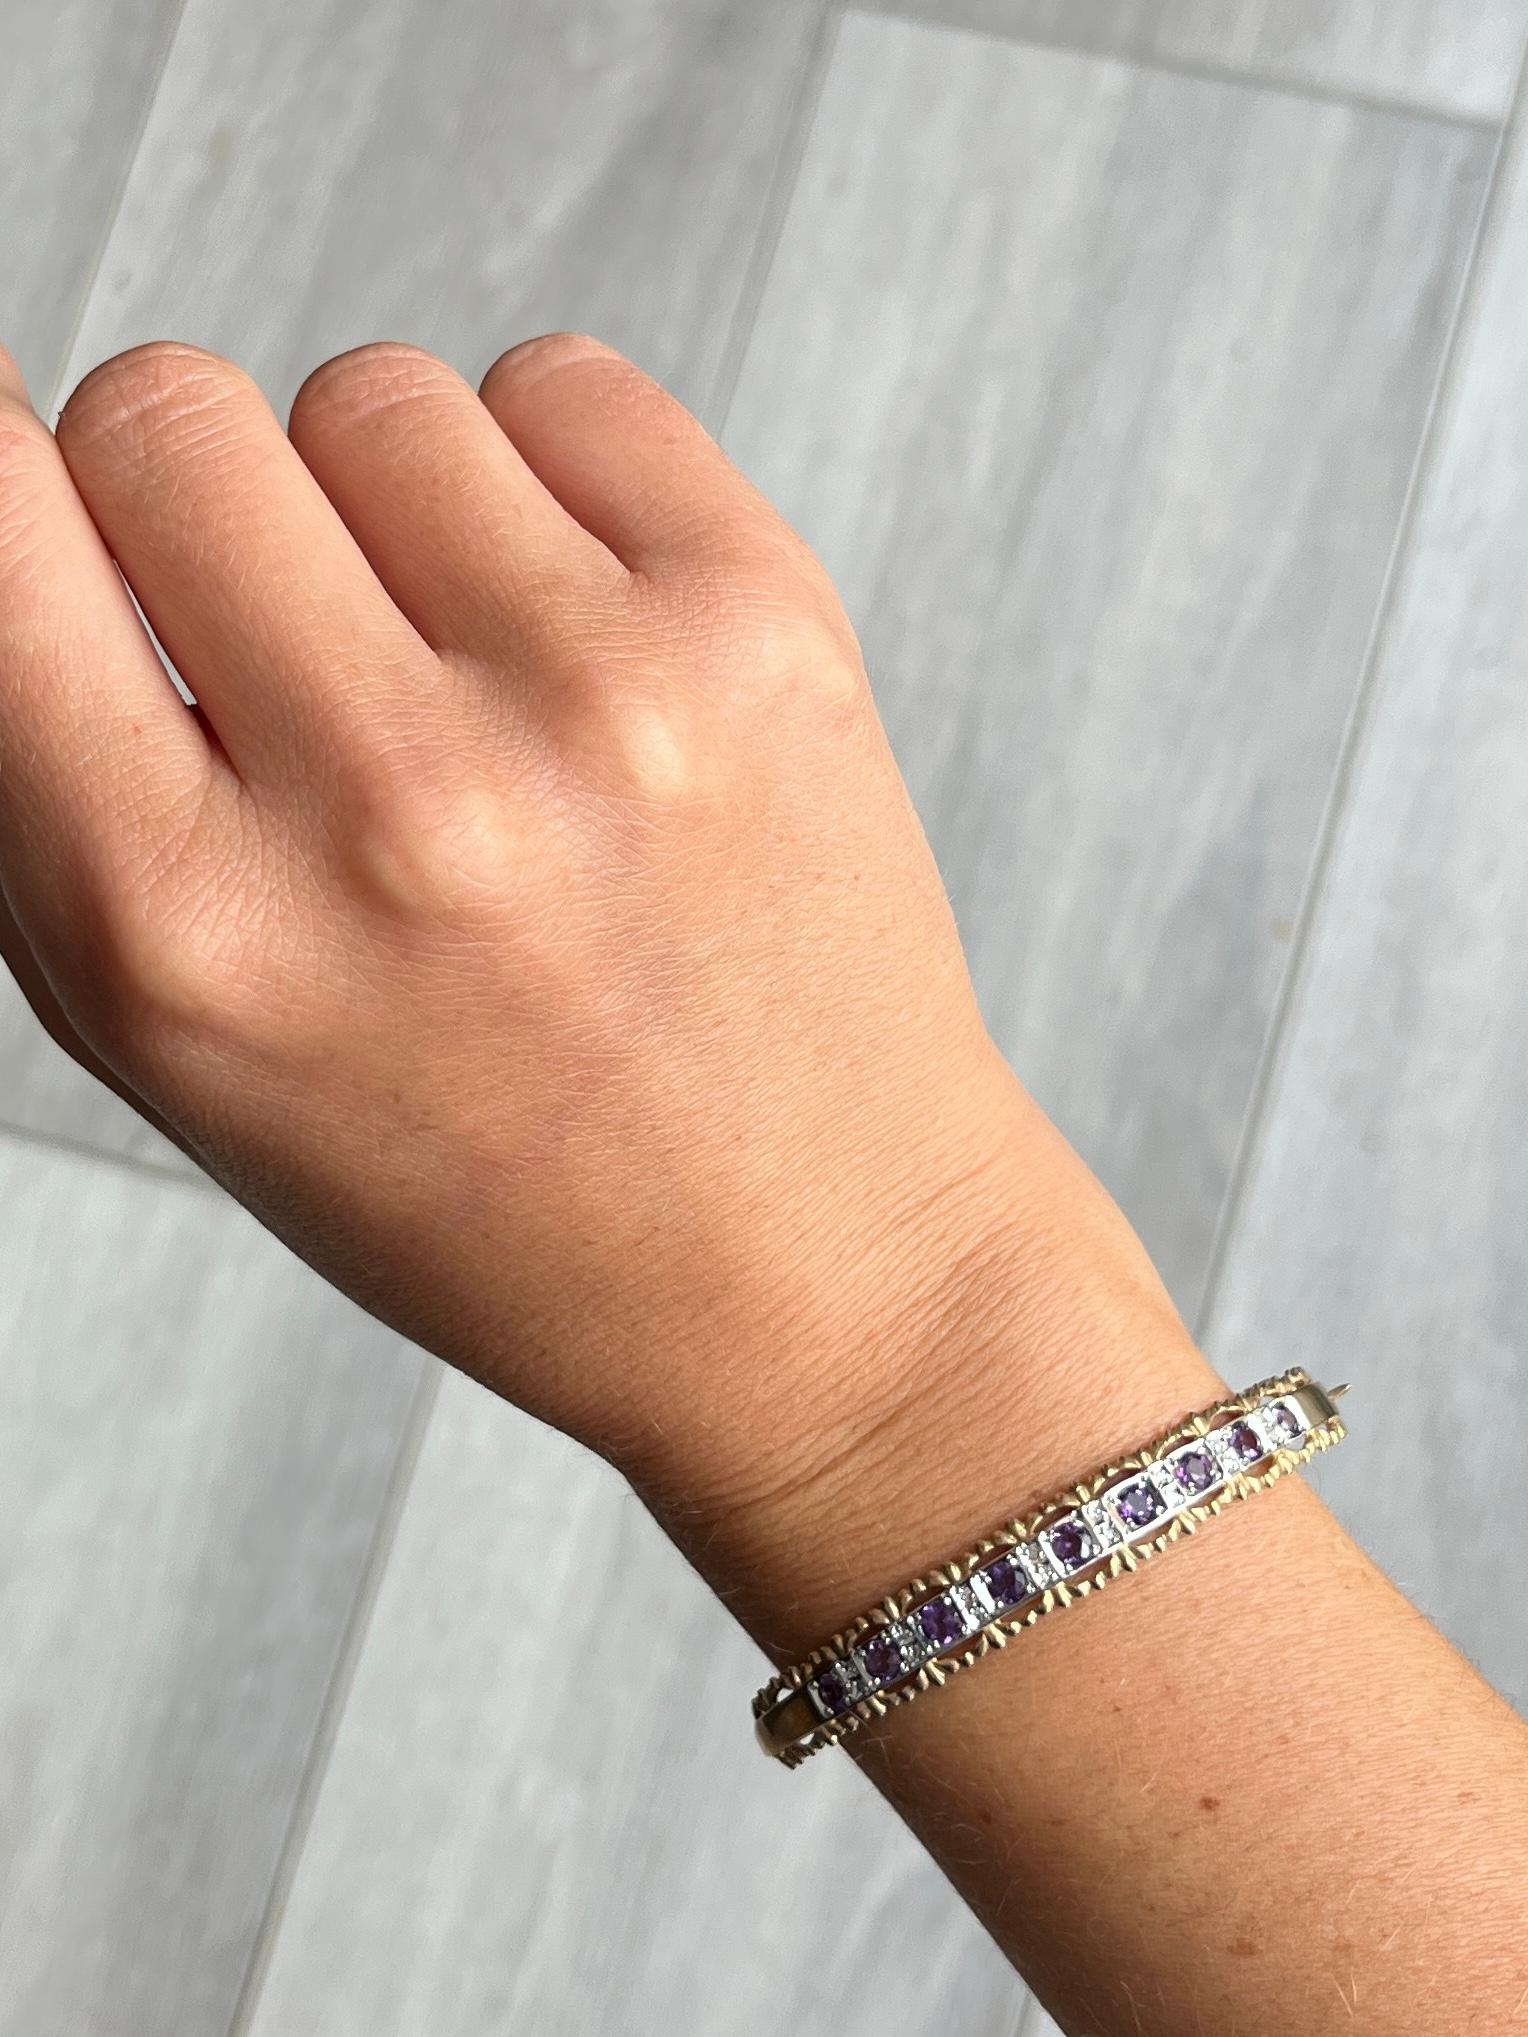 An exquisite antique bangle. Set with nine Amethyst stones which total 1.25ct. In between all f these gorgeous lilac stones are pairs of diamond points. All modelled in 9 carat yellow gold.

Diameter: 5.8cm (from hinge to clasp)
Front width: